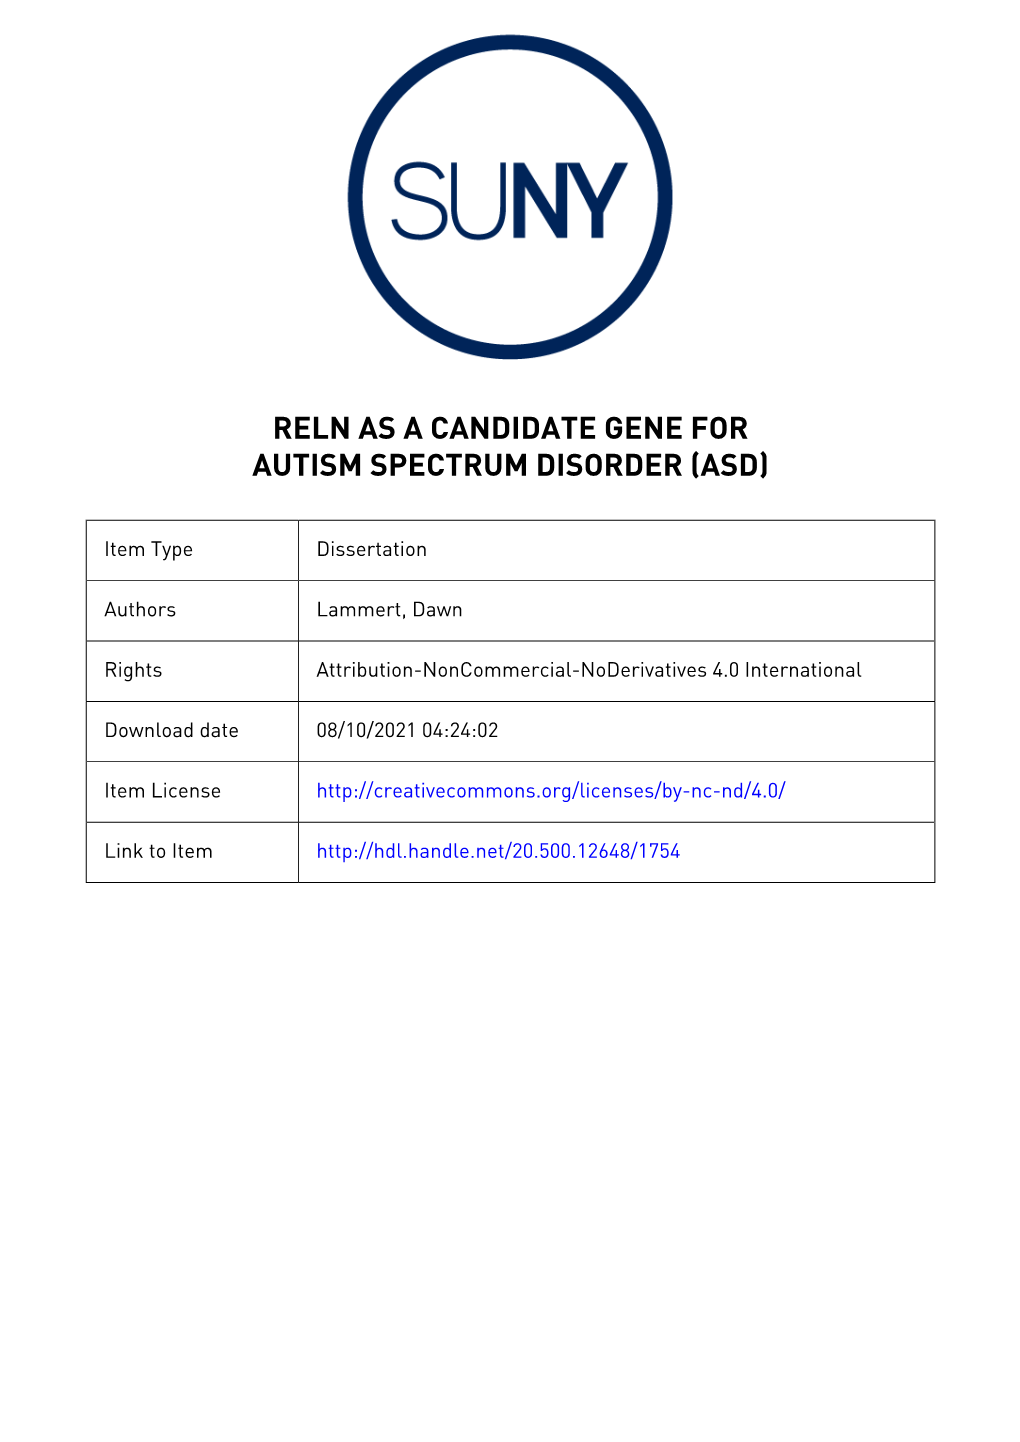 Reln As a Candidate Gene for Autism Spectrum Disorder (Asd)